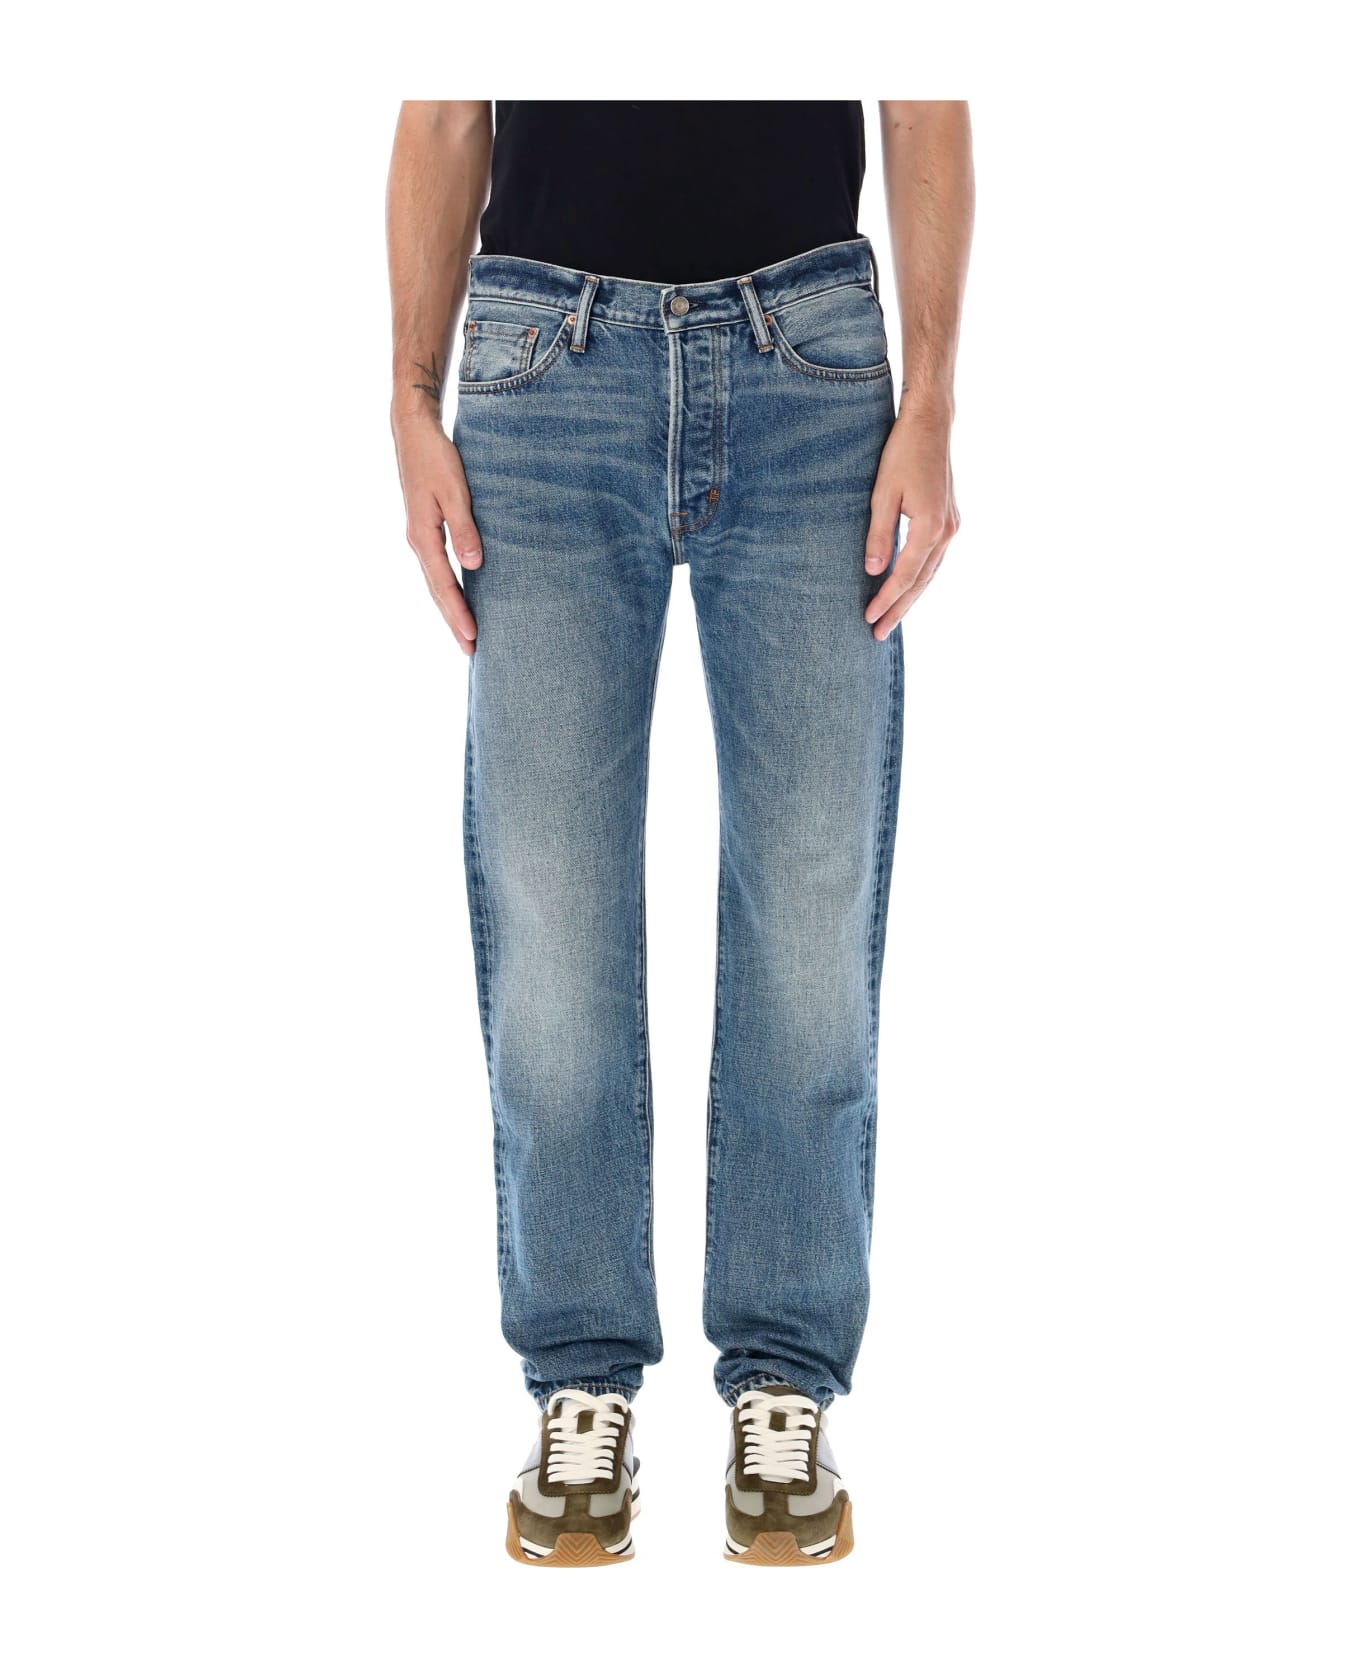 Tom Ford Slim Denim Jeans - AUTHENTIC WASHED